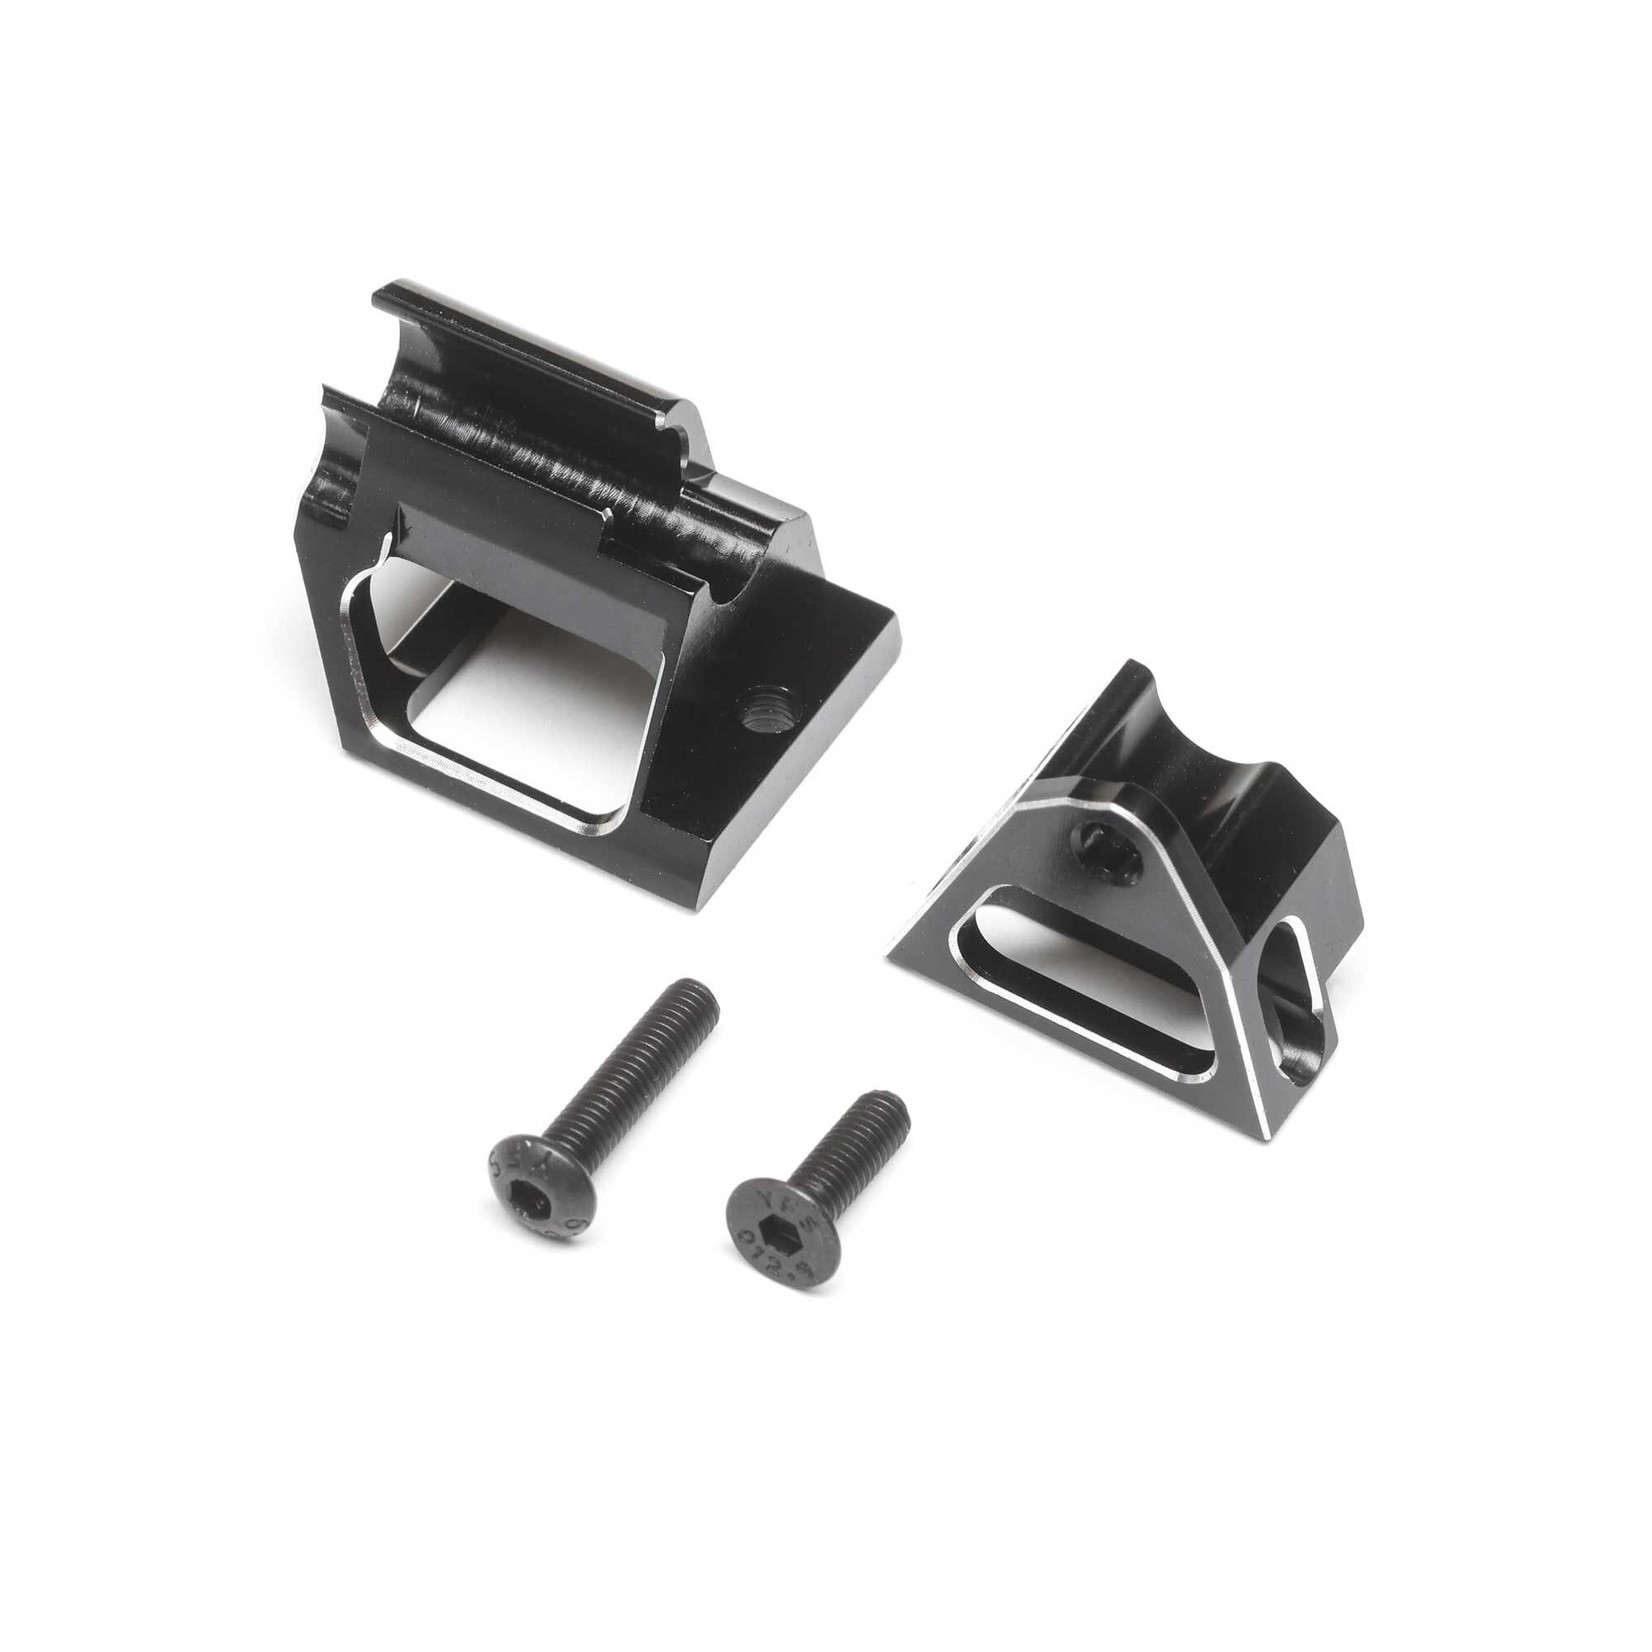 Team Losi Racing (TLR) Tranny to Chassis Brace, Aluminum, Laydown: 22 5.0